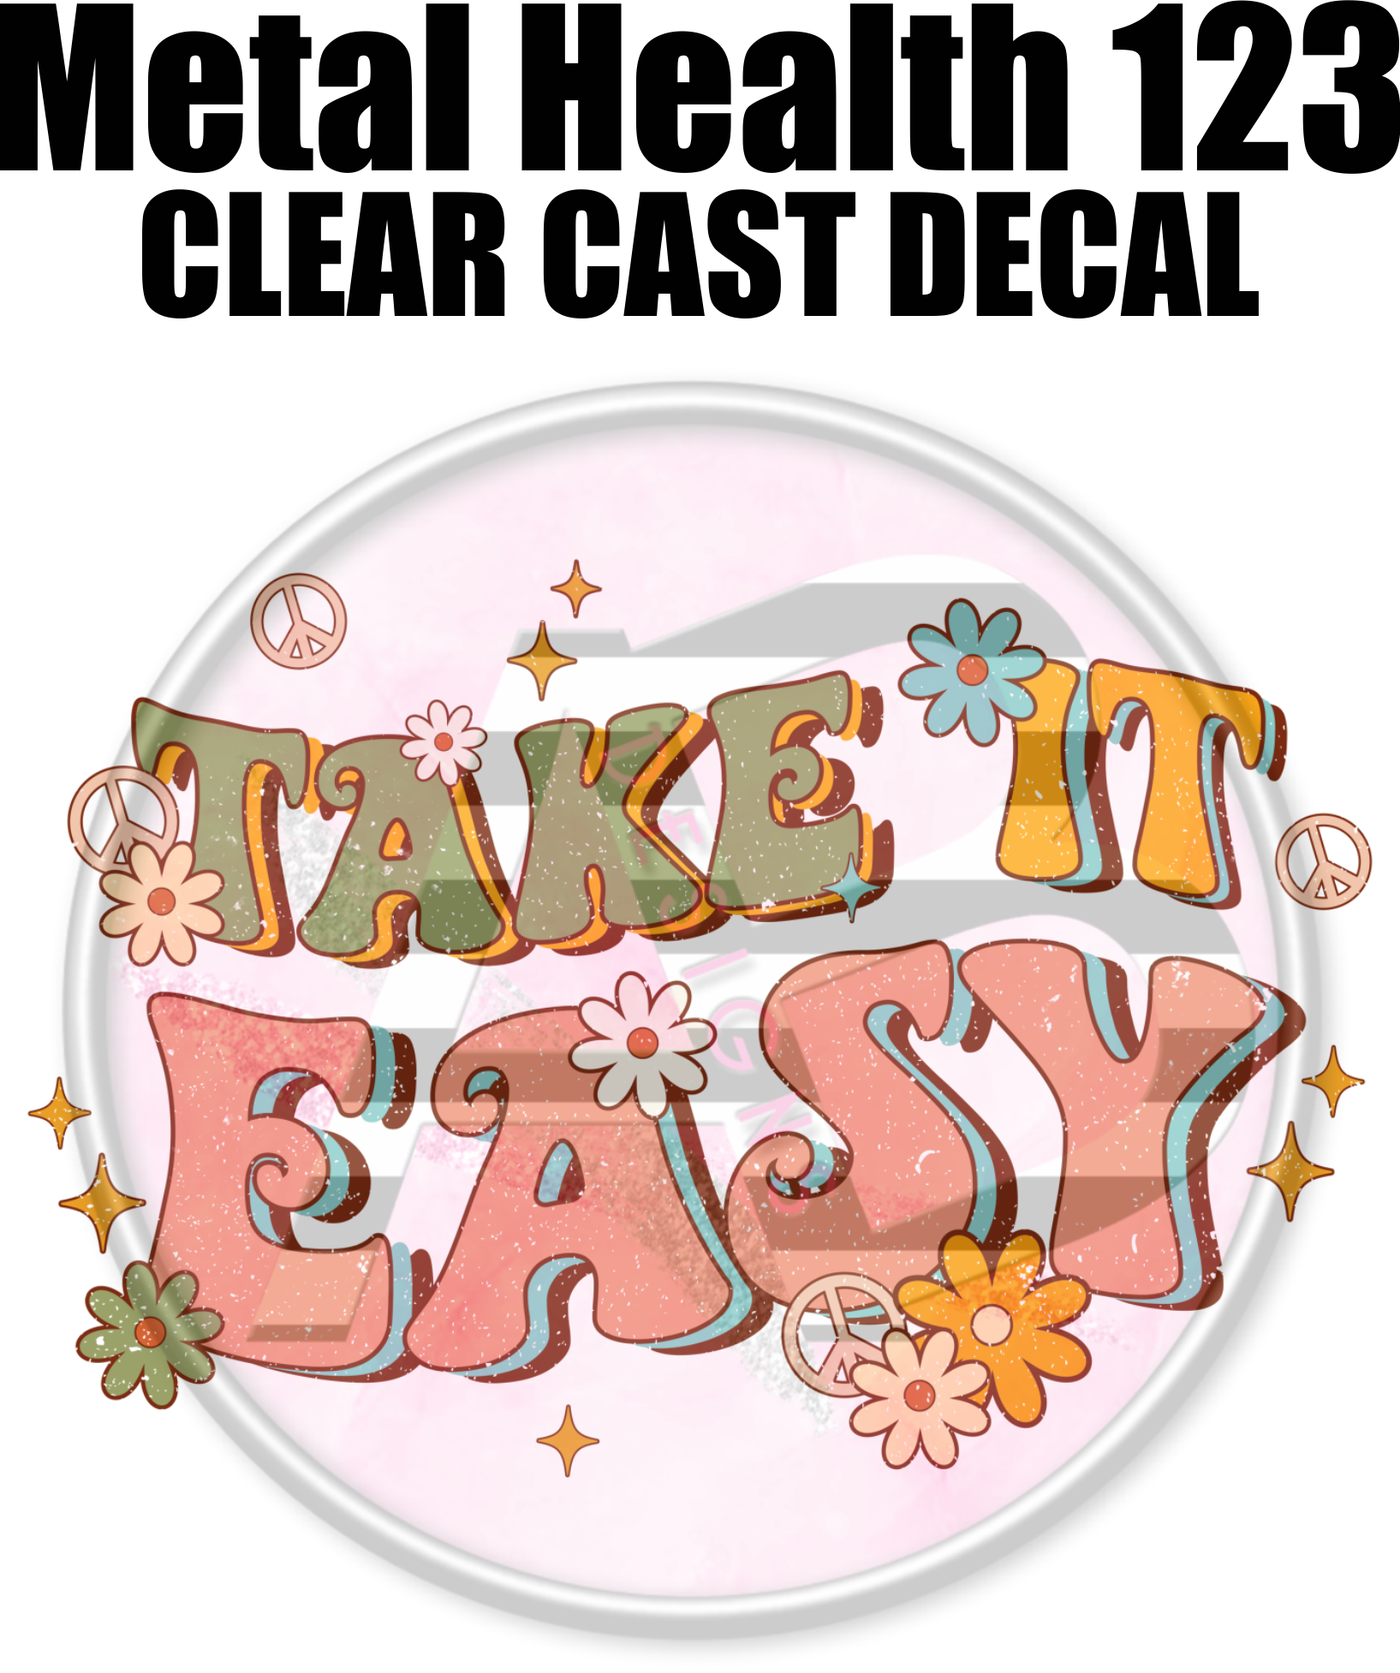 Mental Health 123 - Clear Cast Decal-592